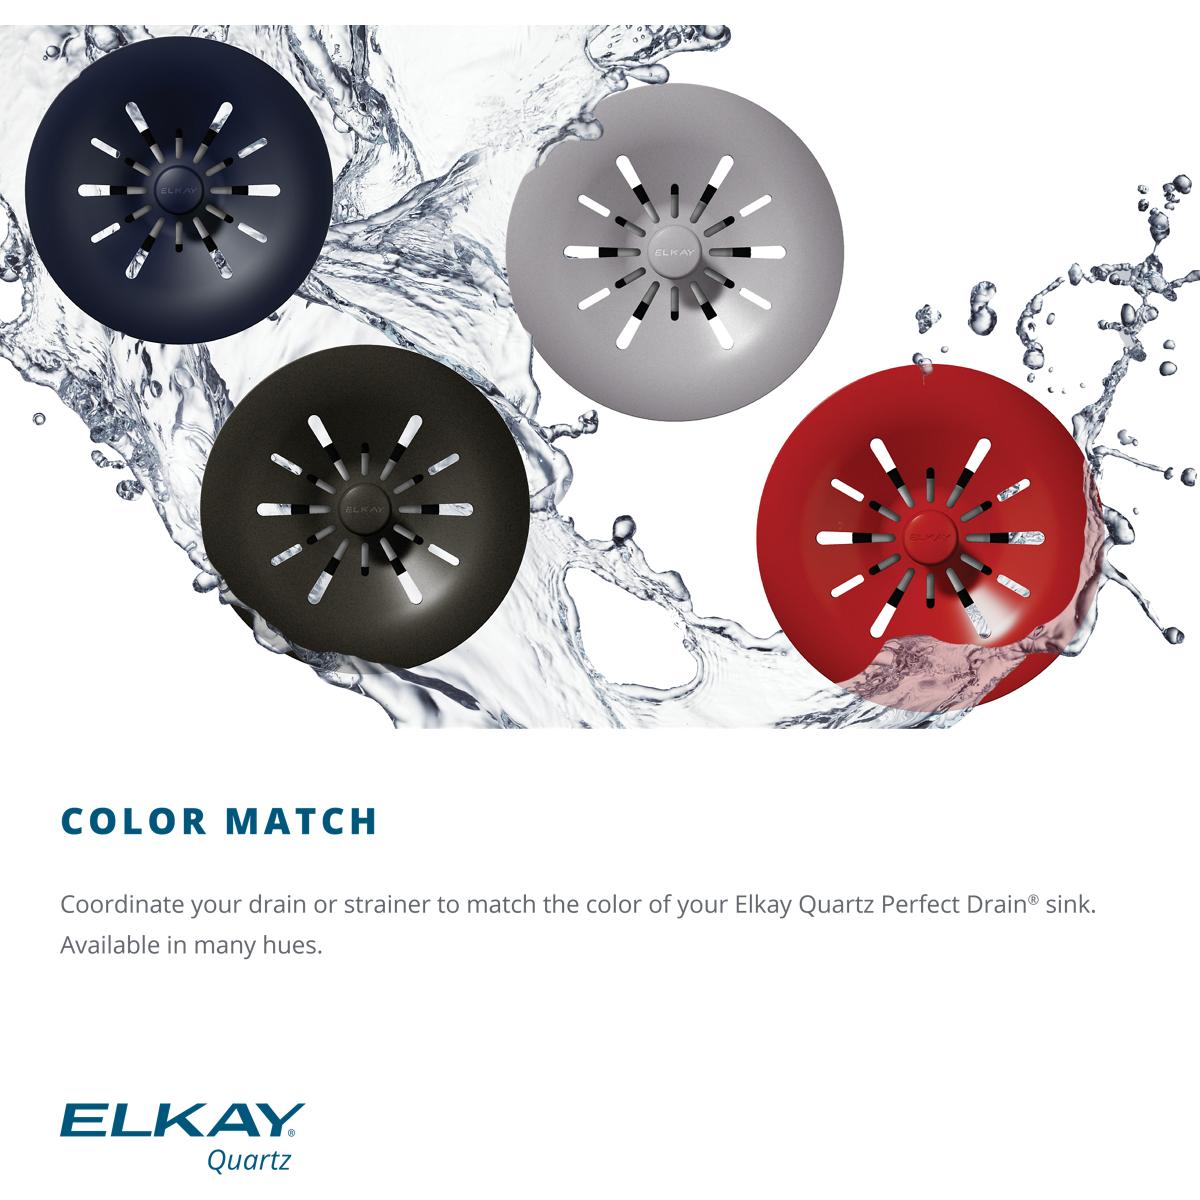 Elkay Quartz Perfect Drain 3-1/2" Removable Polymer Basket Strainer and Rubber Stopper